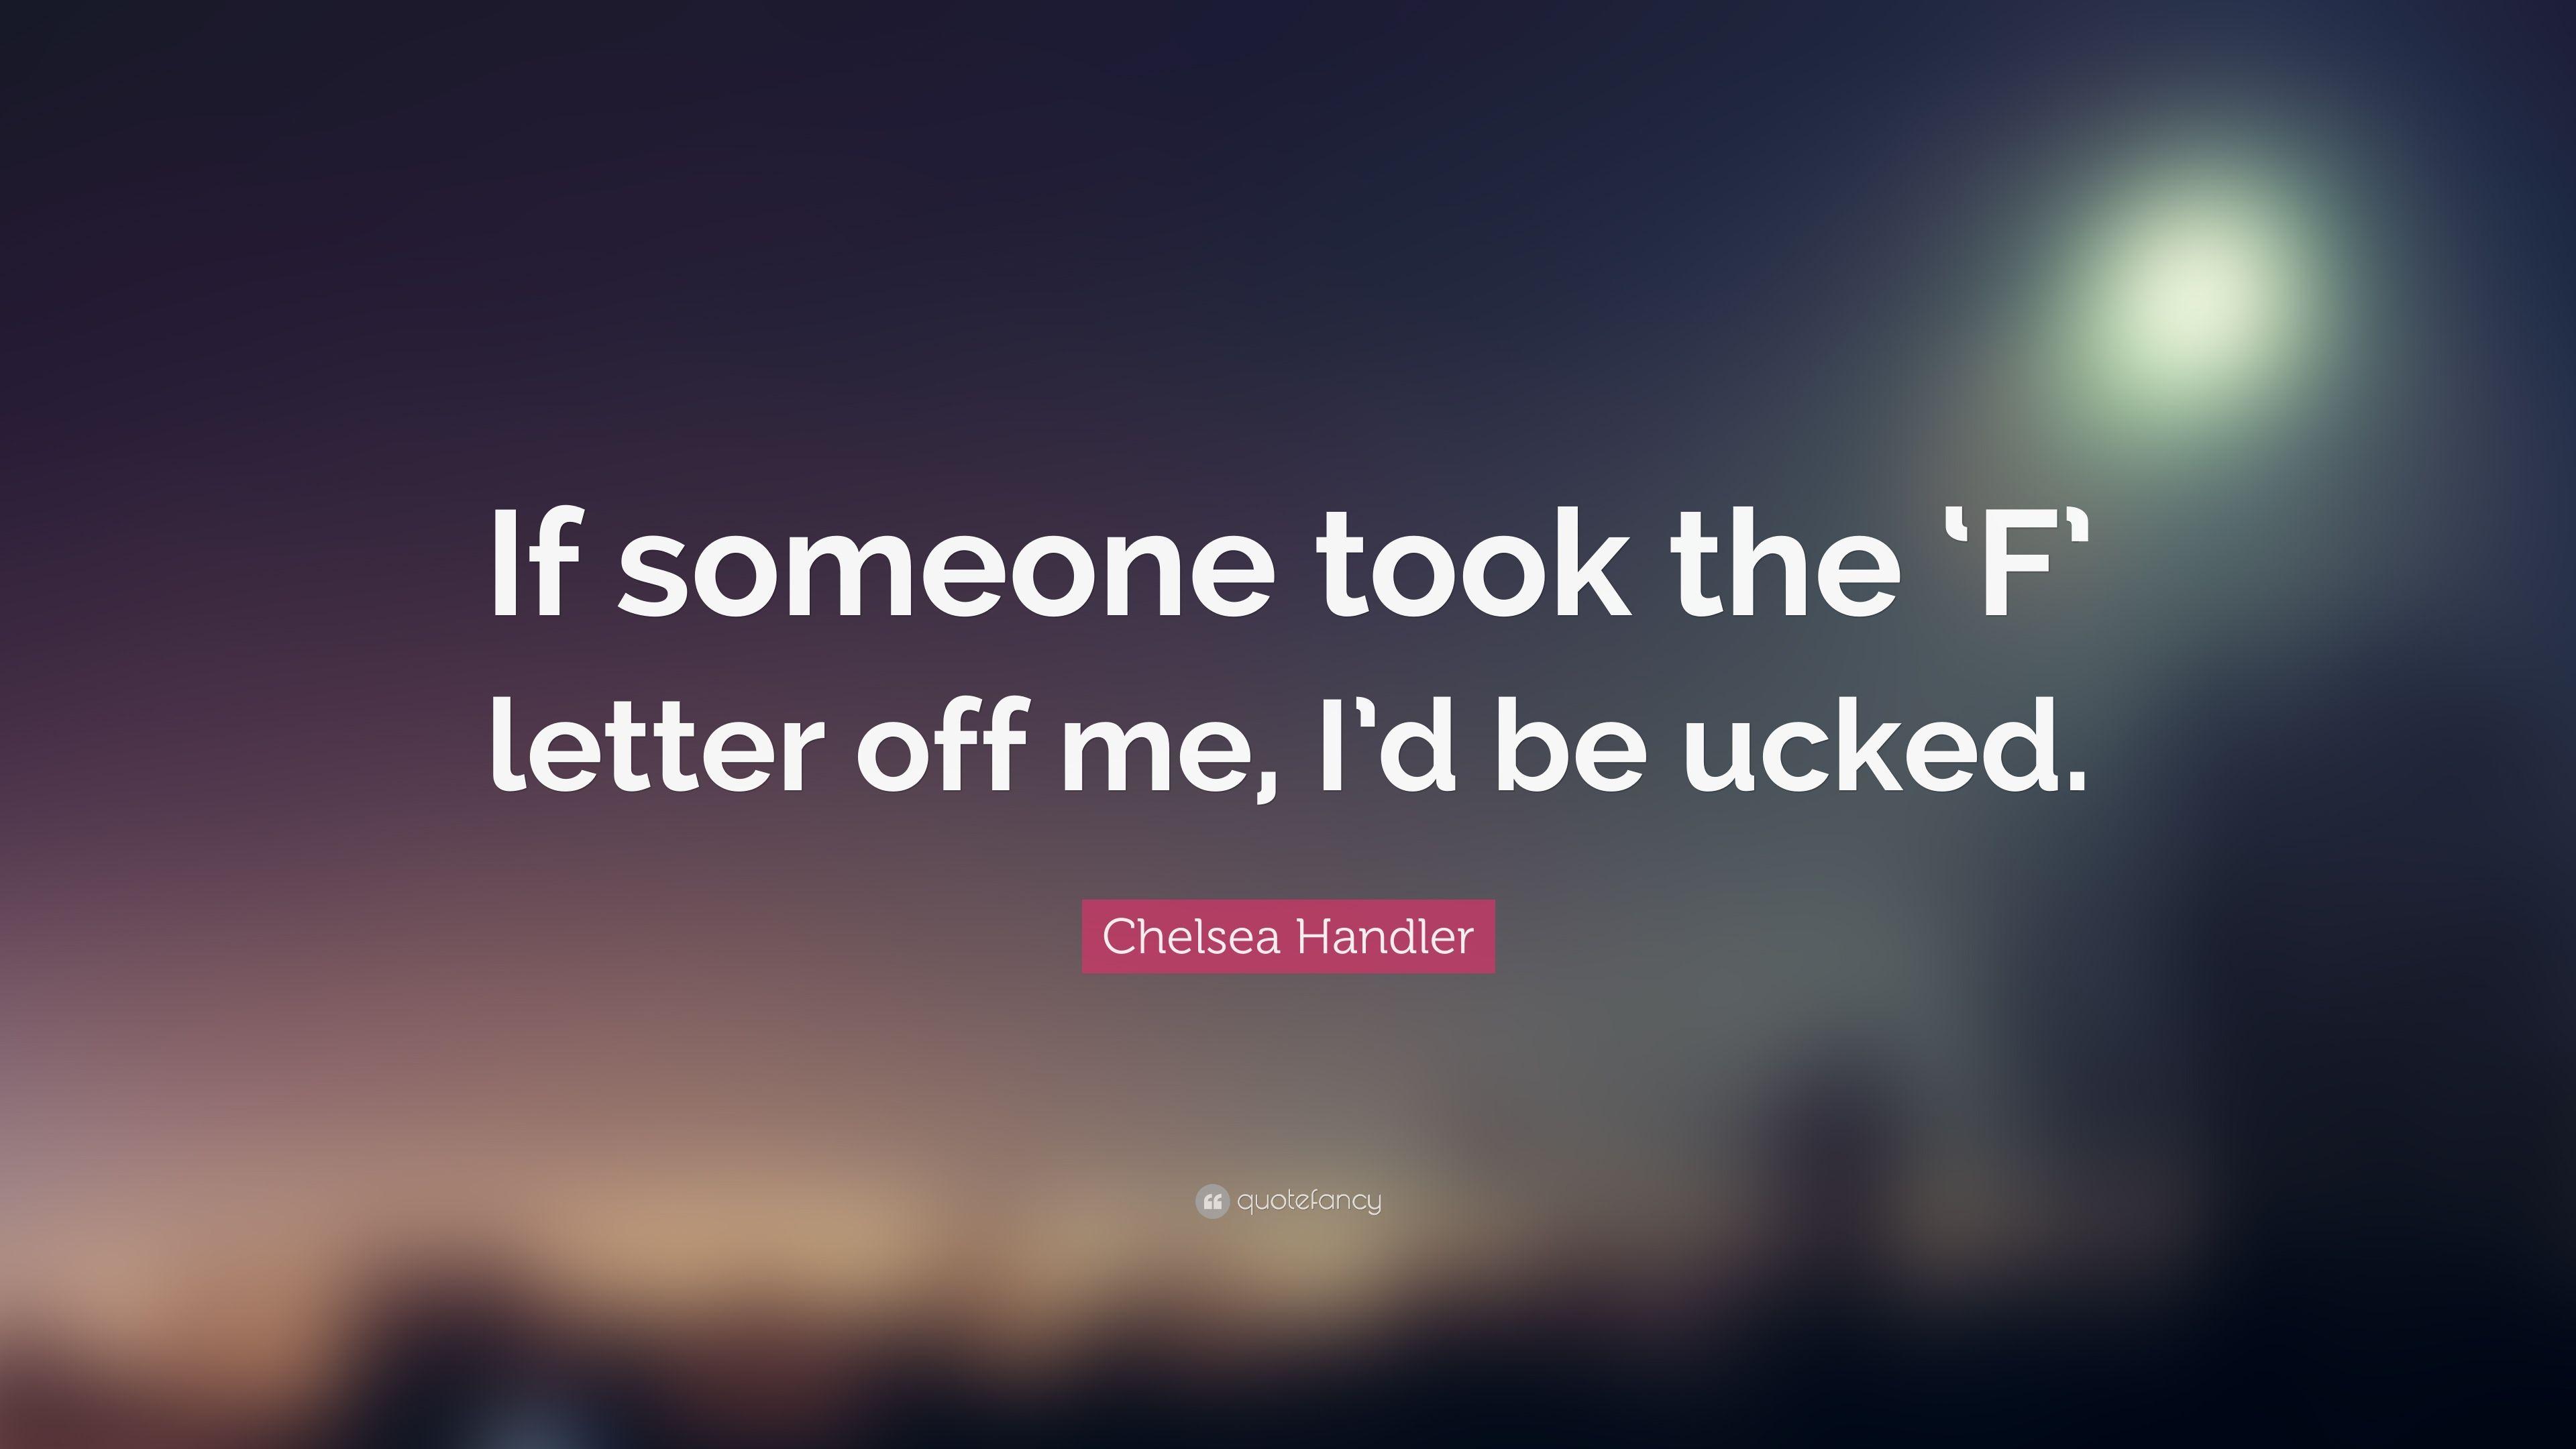 Chelsea Handler Quote: “If someone took the 'F' letter off me, I'd